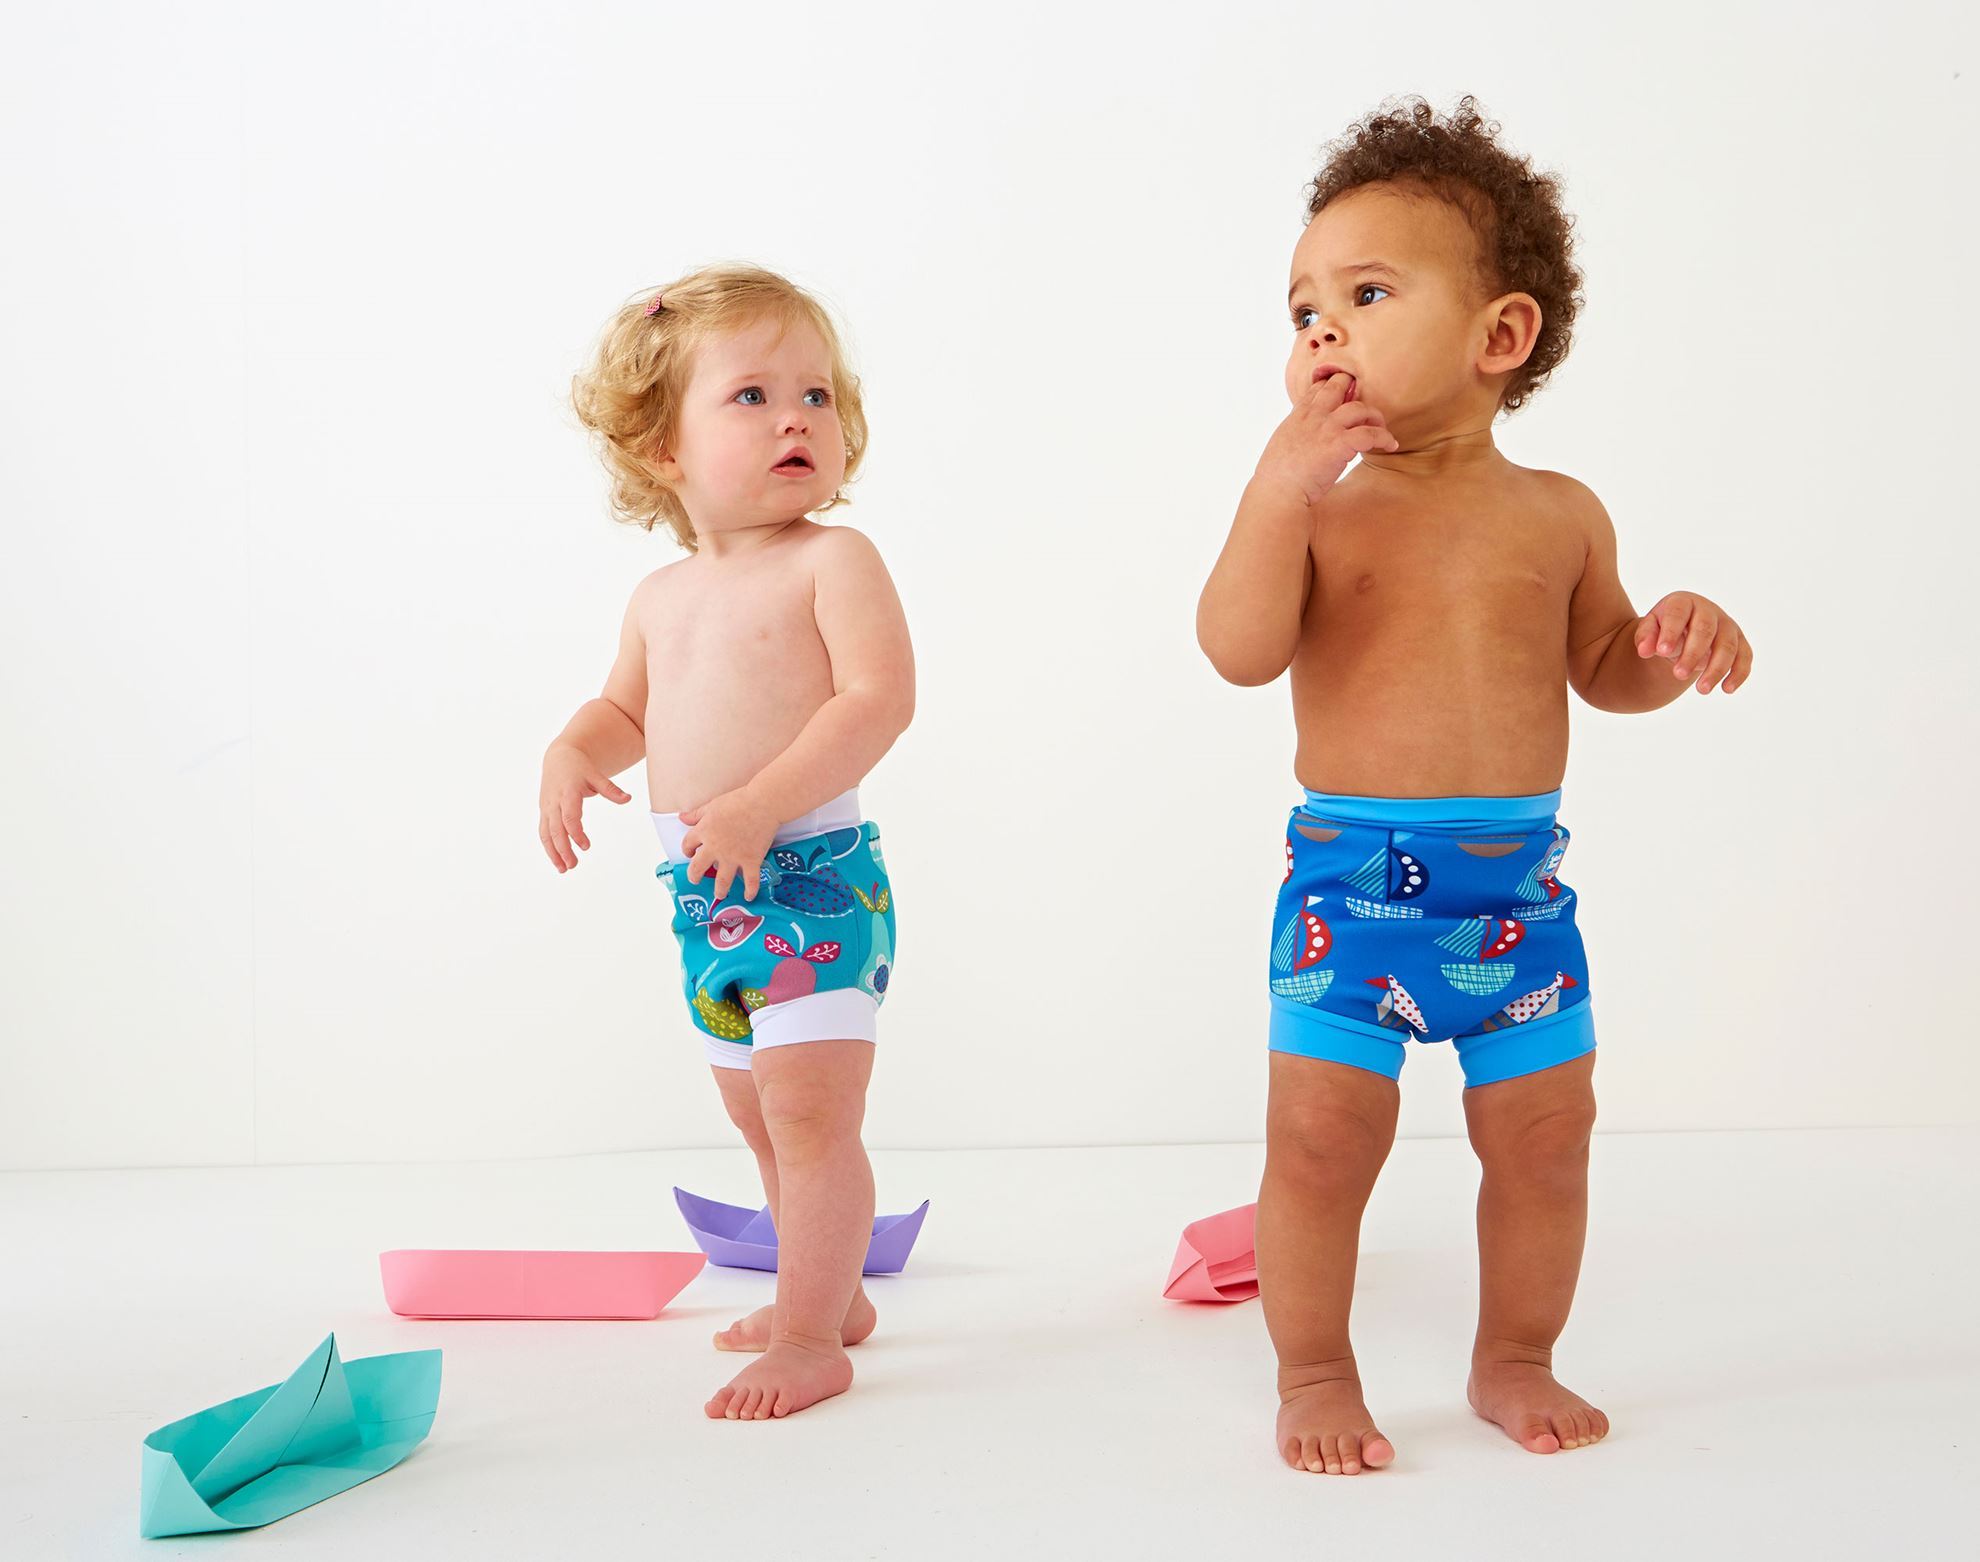 Reasons Why You Need To Select The Right Swim Nappies